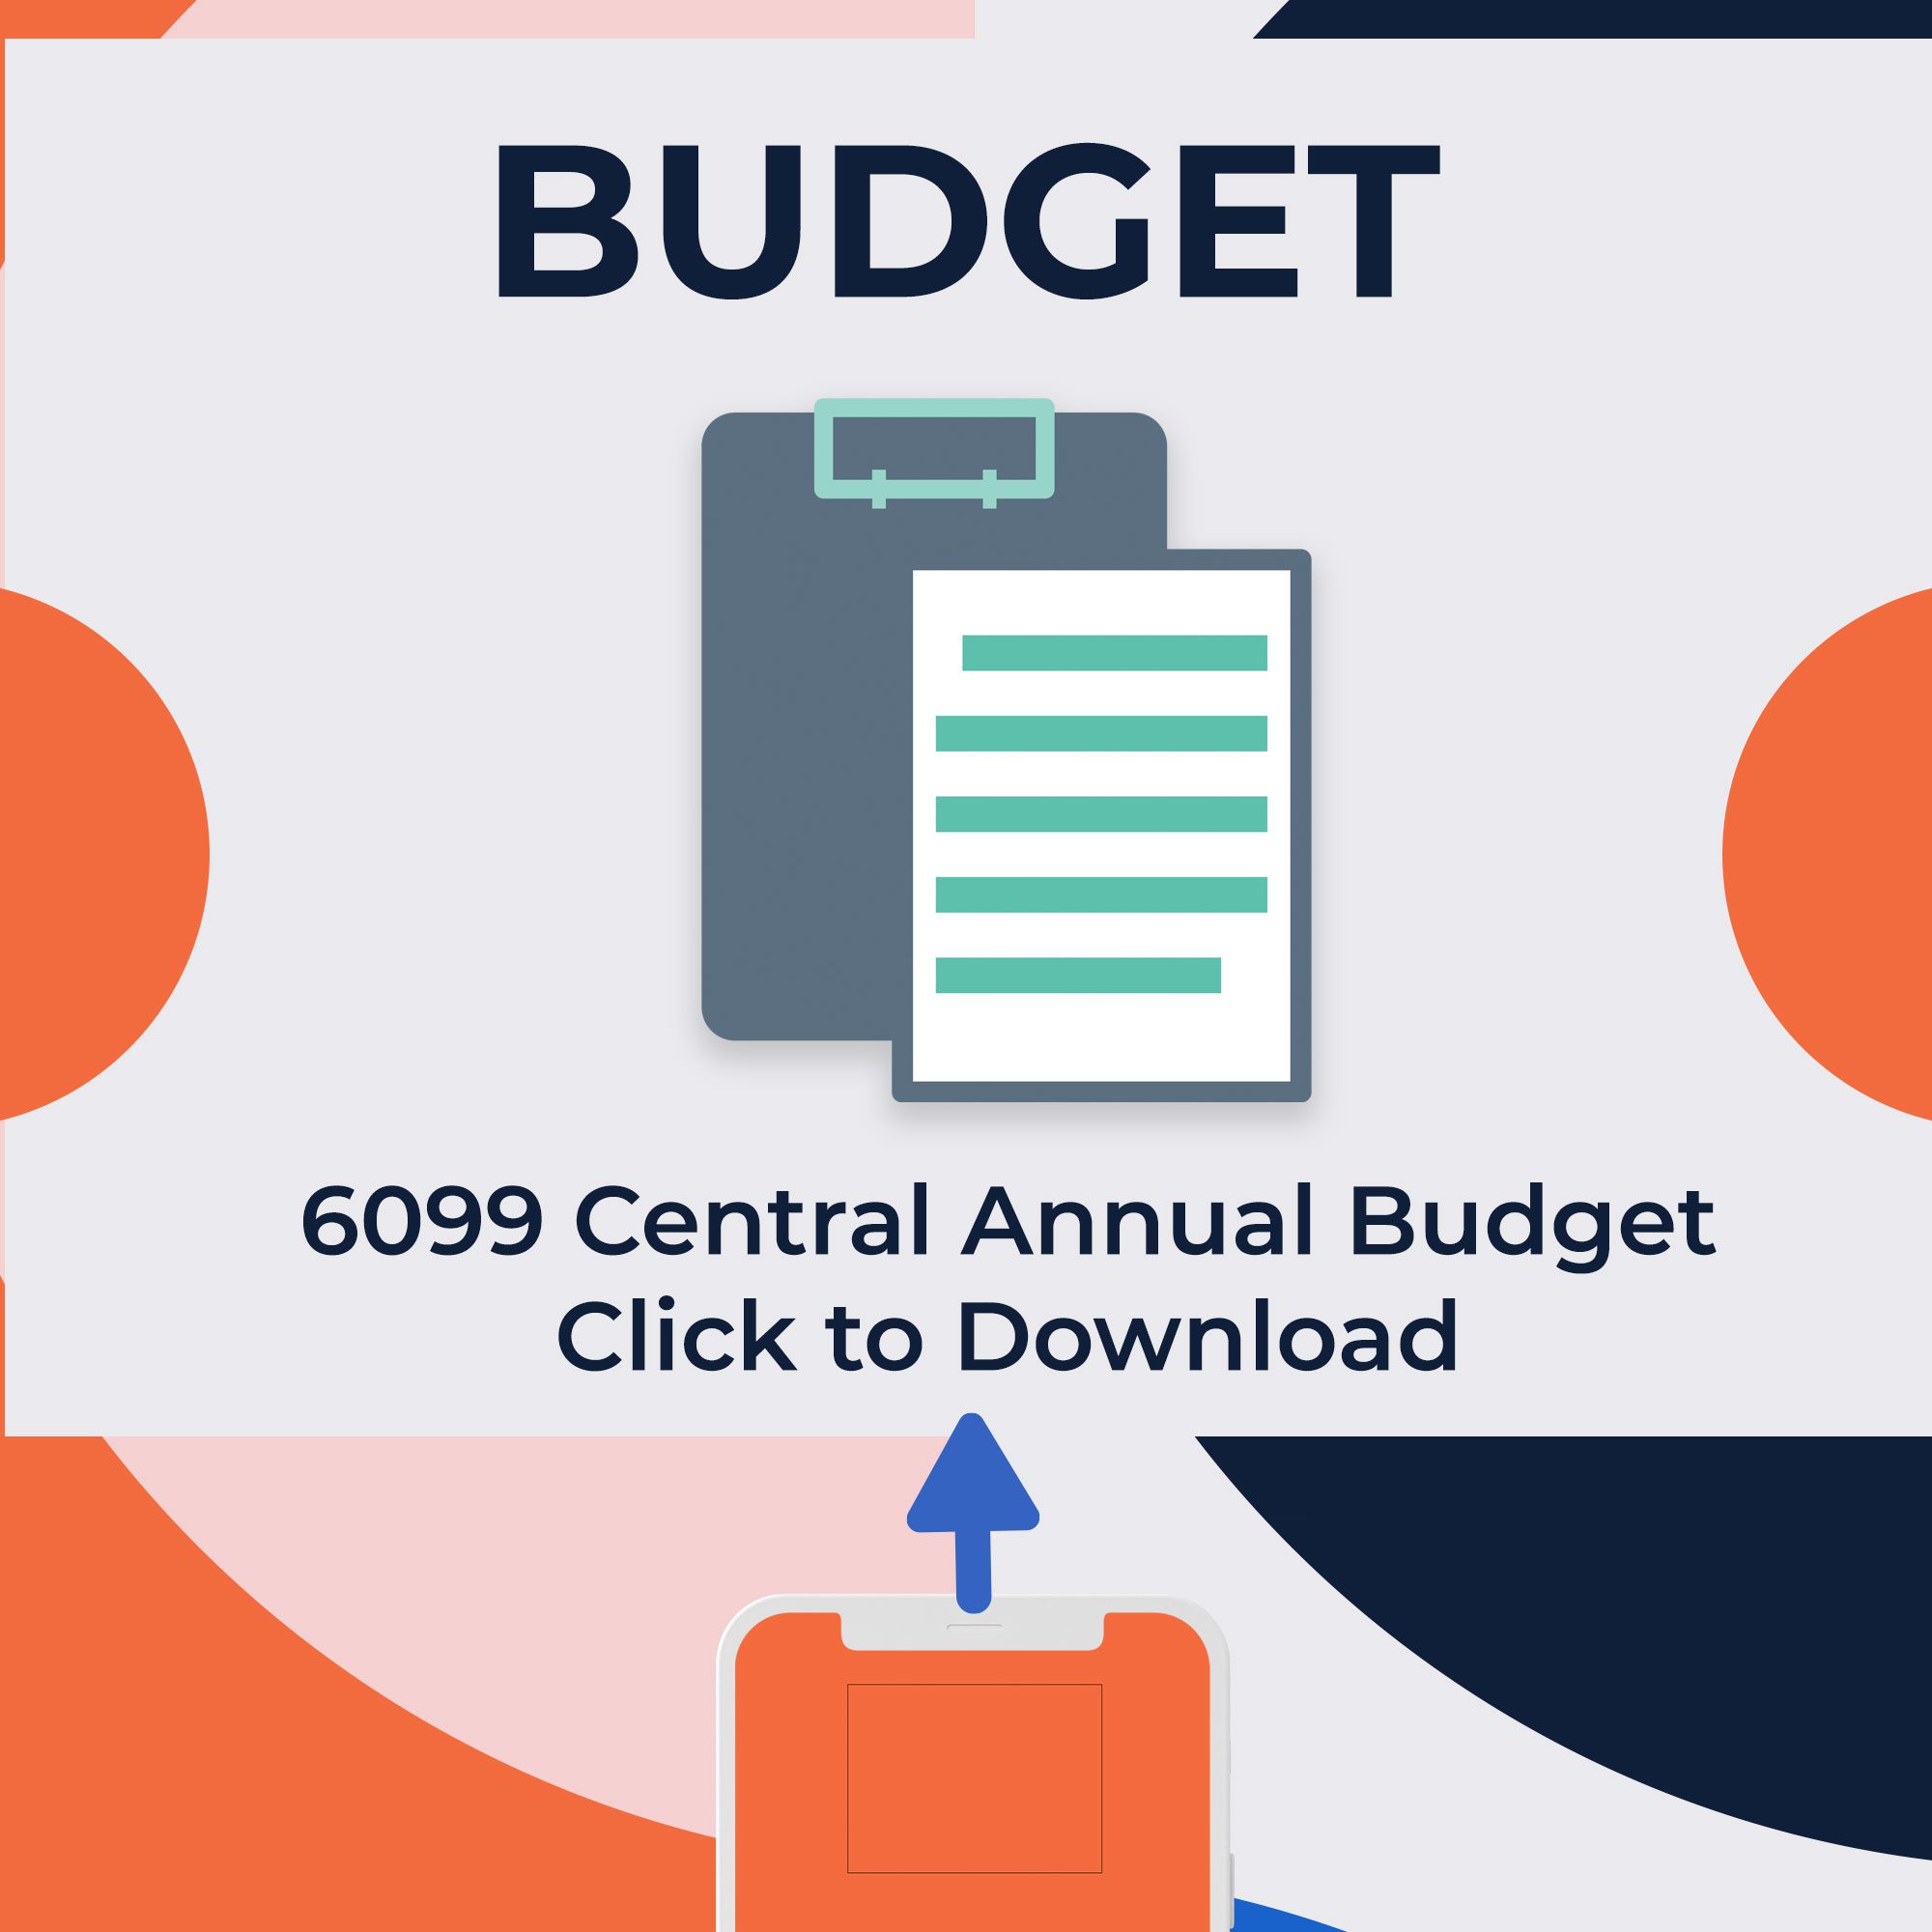 6099 Central Annual Budget